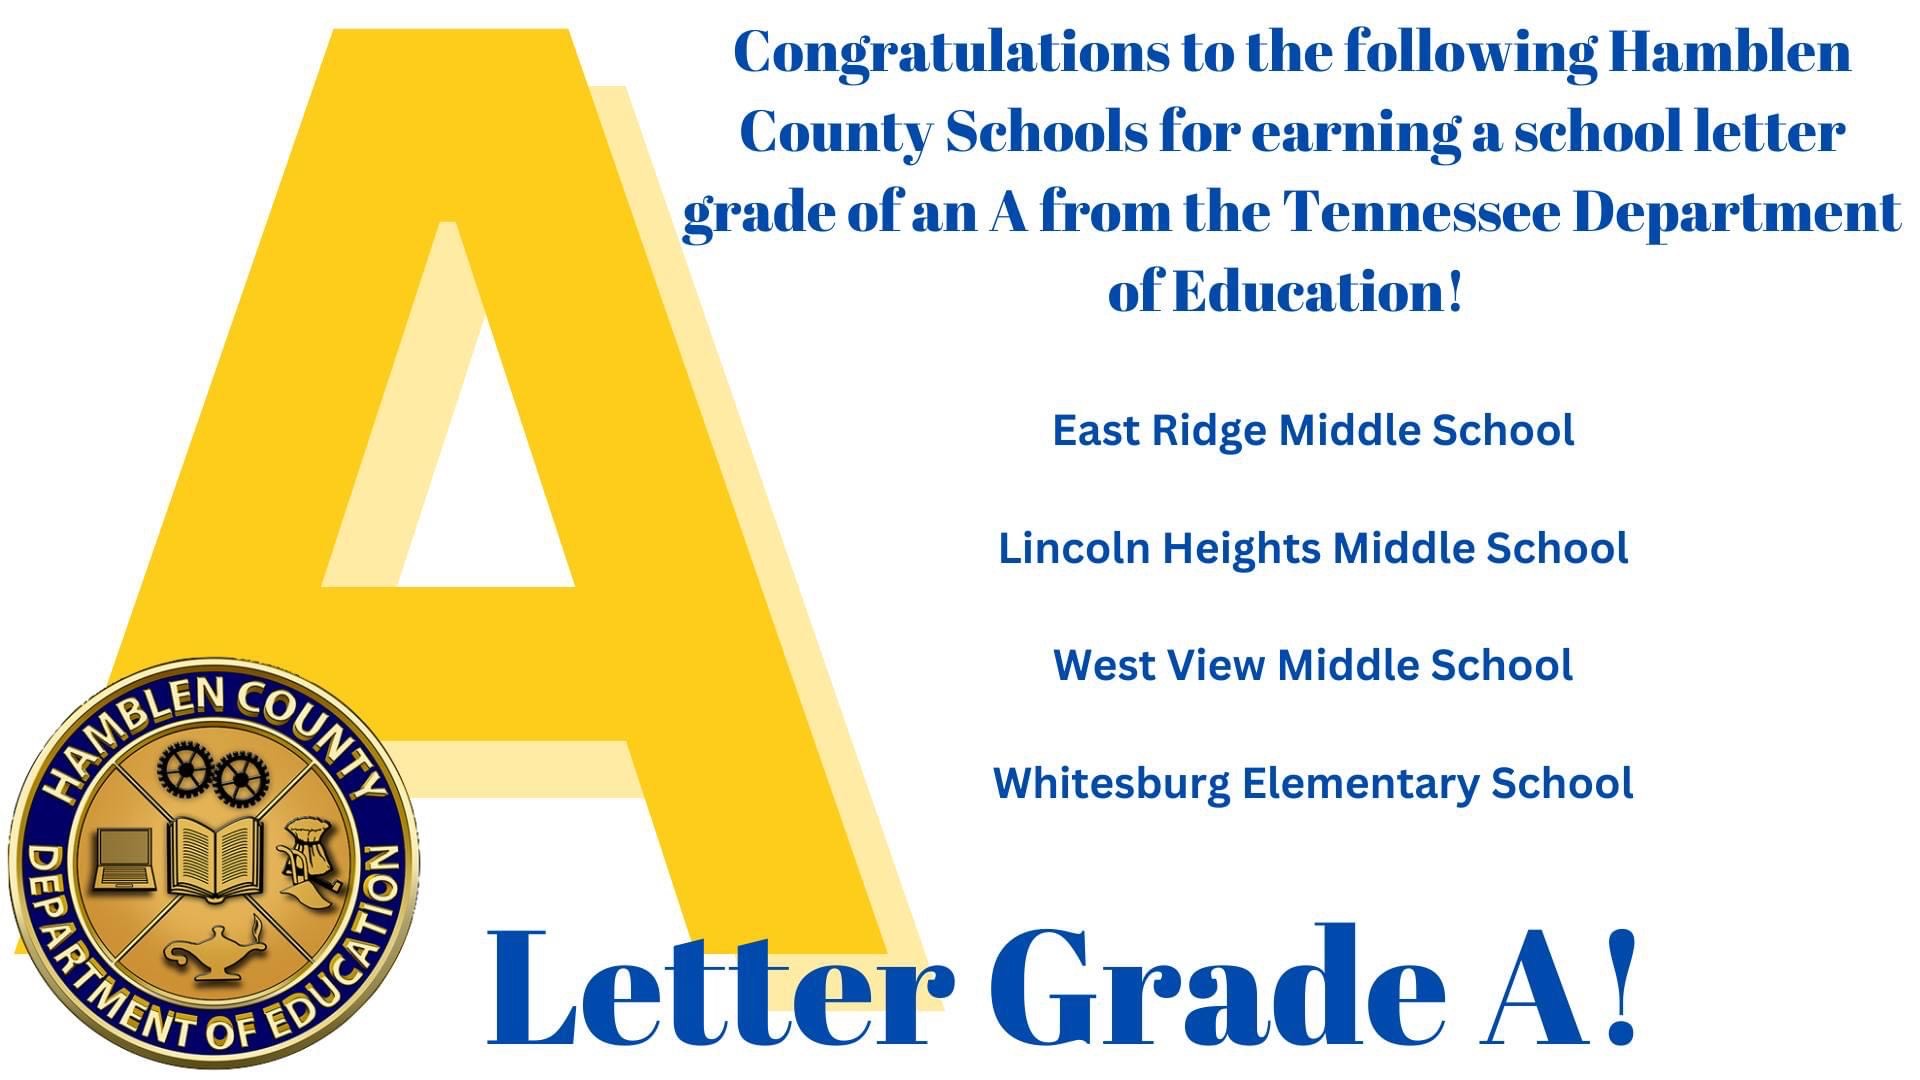 Congratulations to the following Hamblen County Schools for earning a school letter grade of an A from the Tennessee Department of Educaiton!  East Ridge Middle School  Lincoln Heights Middle School  West View Middle School  Whitesburg Elementary School  Letter Grade A!